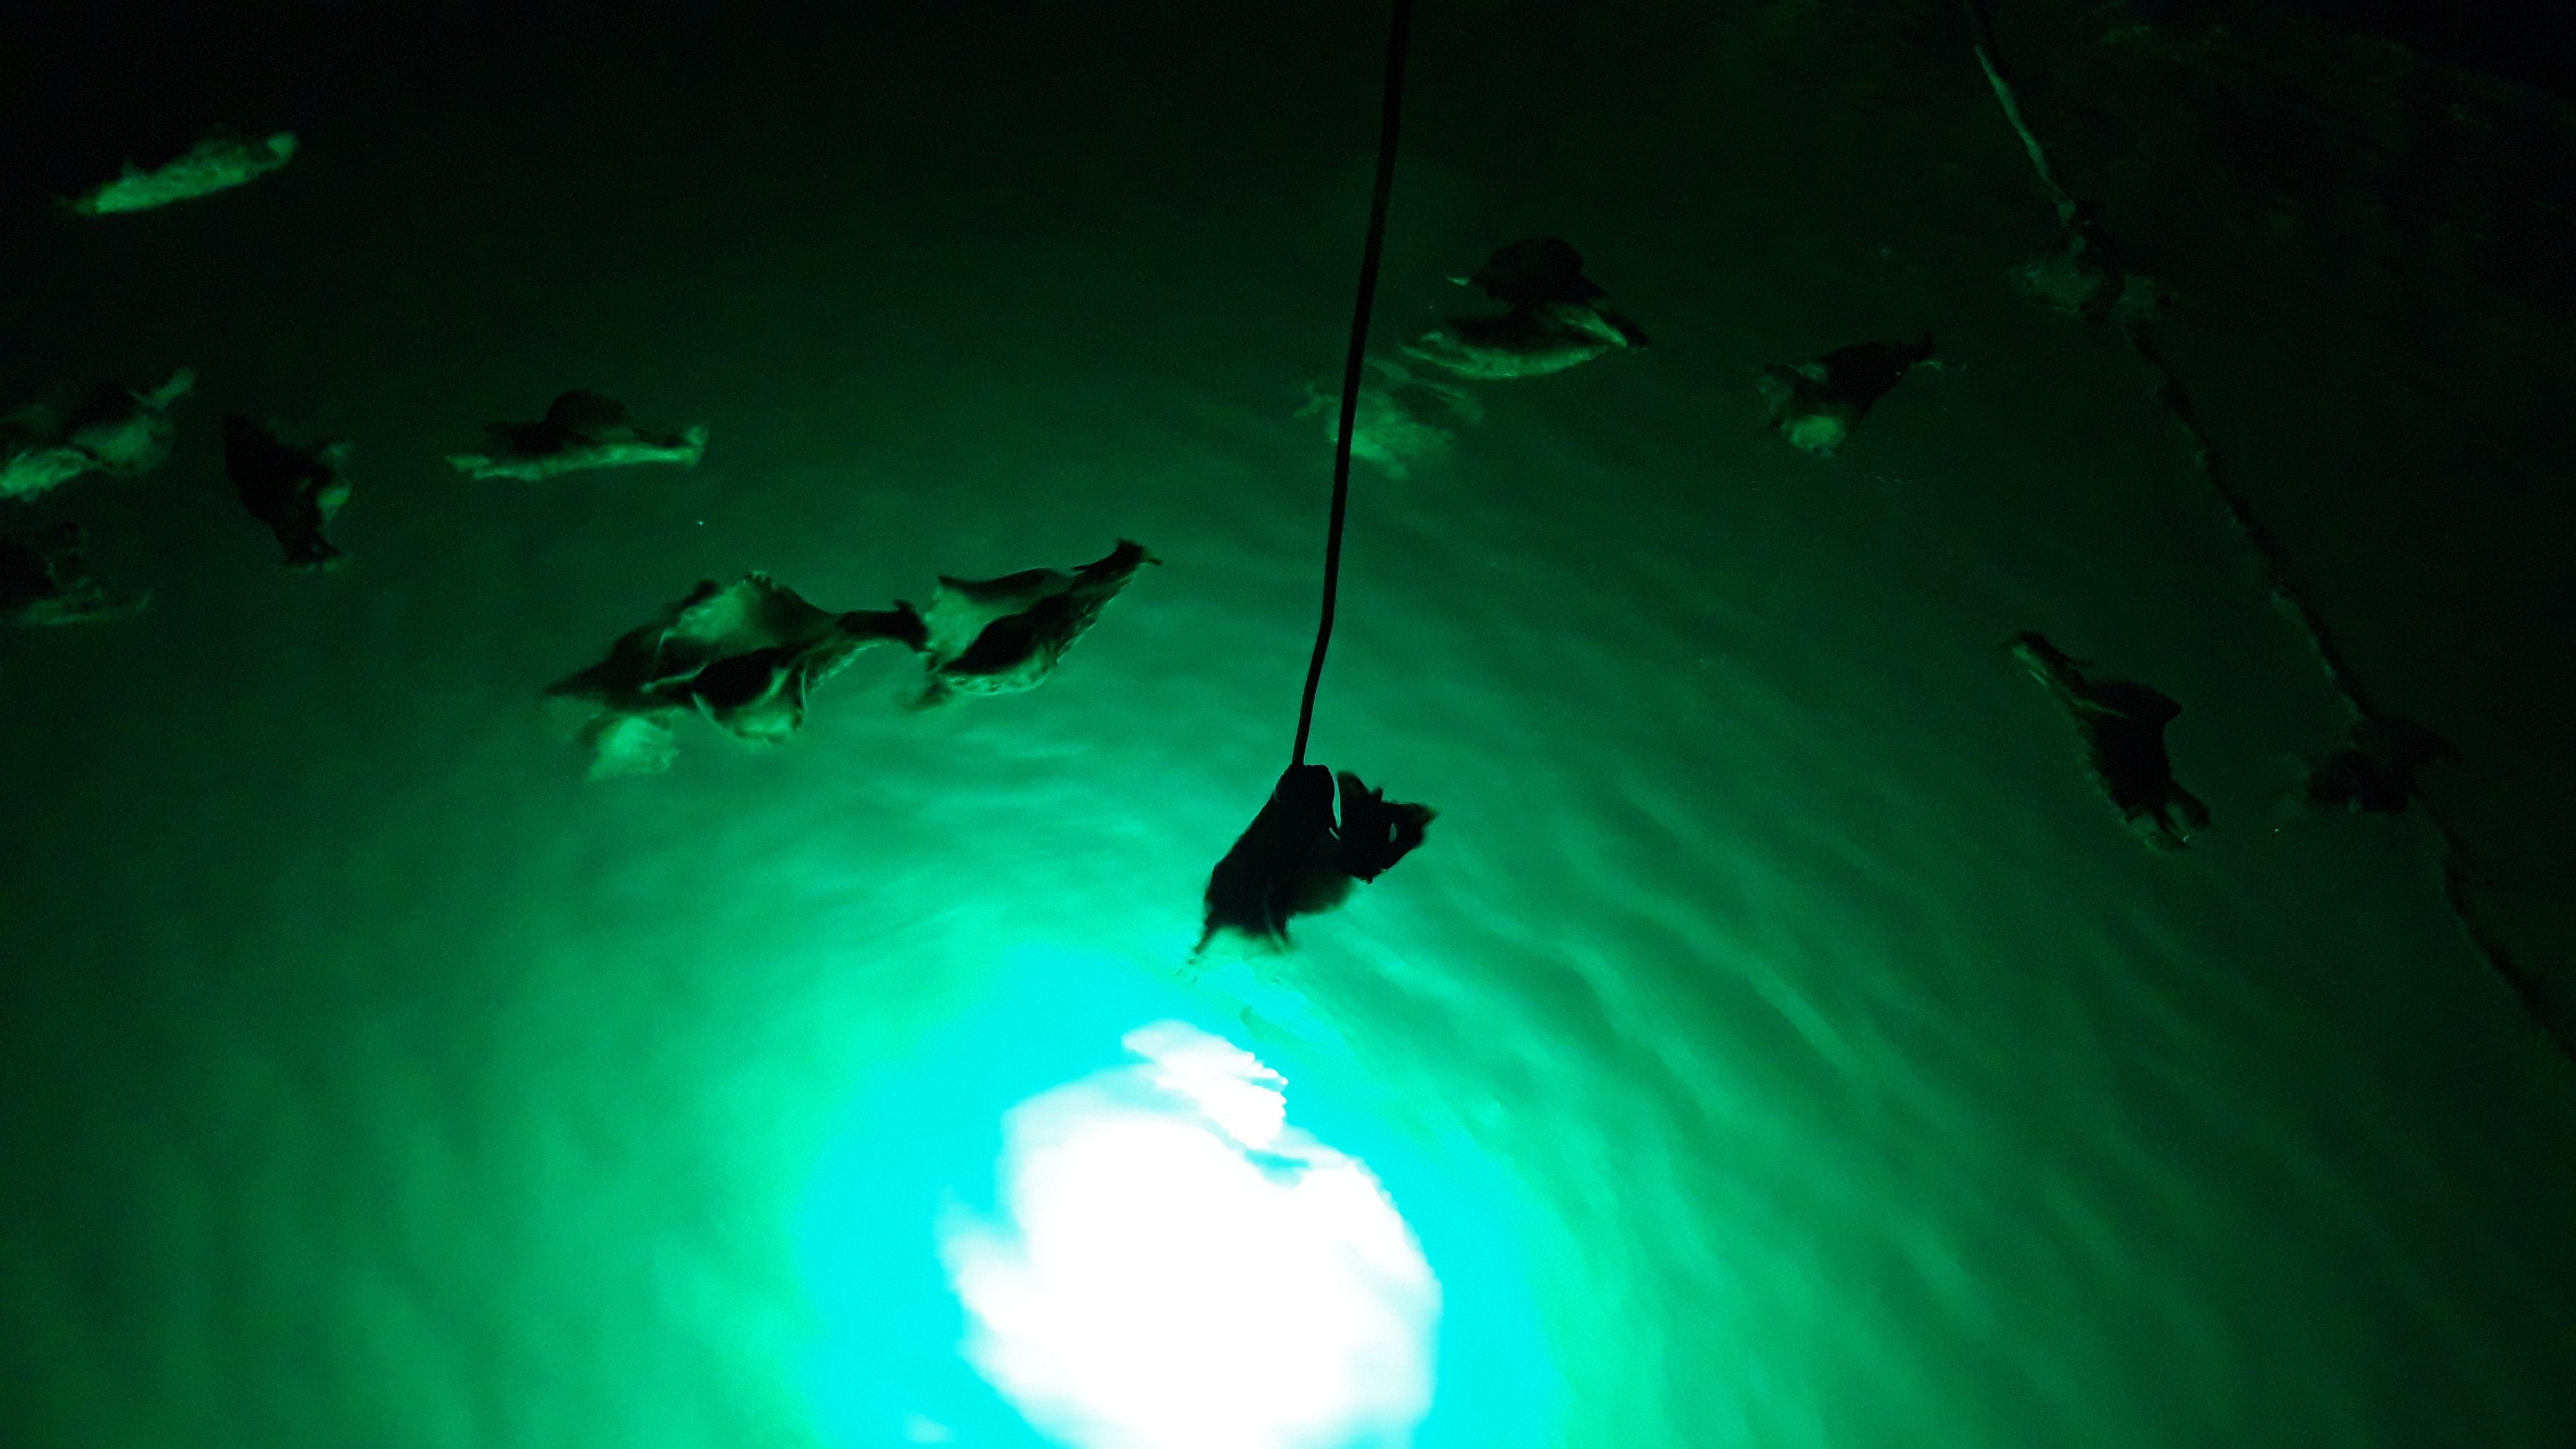 Green Blob Outdoors LED 7500 Lumen Underwater Fishing Light 12 Volt  Alligator Clips & Cigarette Lighter with 30ft Cord Made in Texas : Sports &  Outdoors 